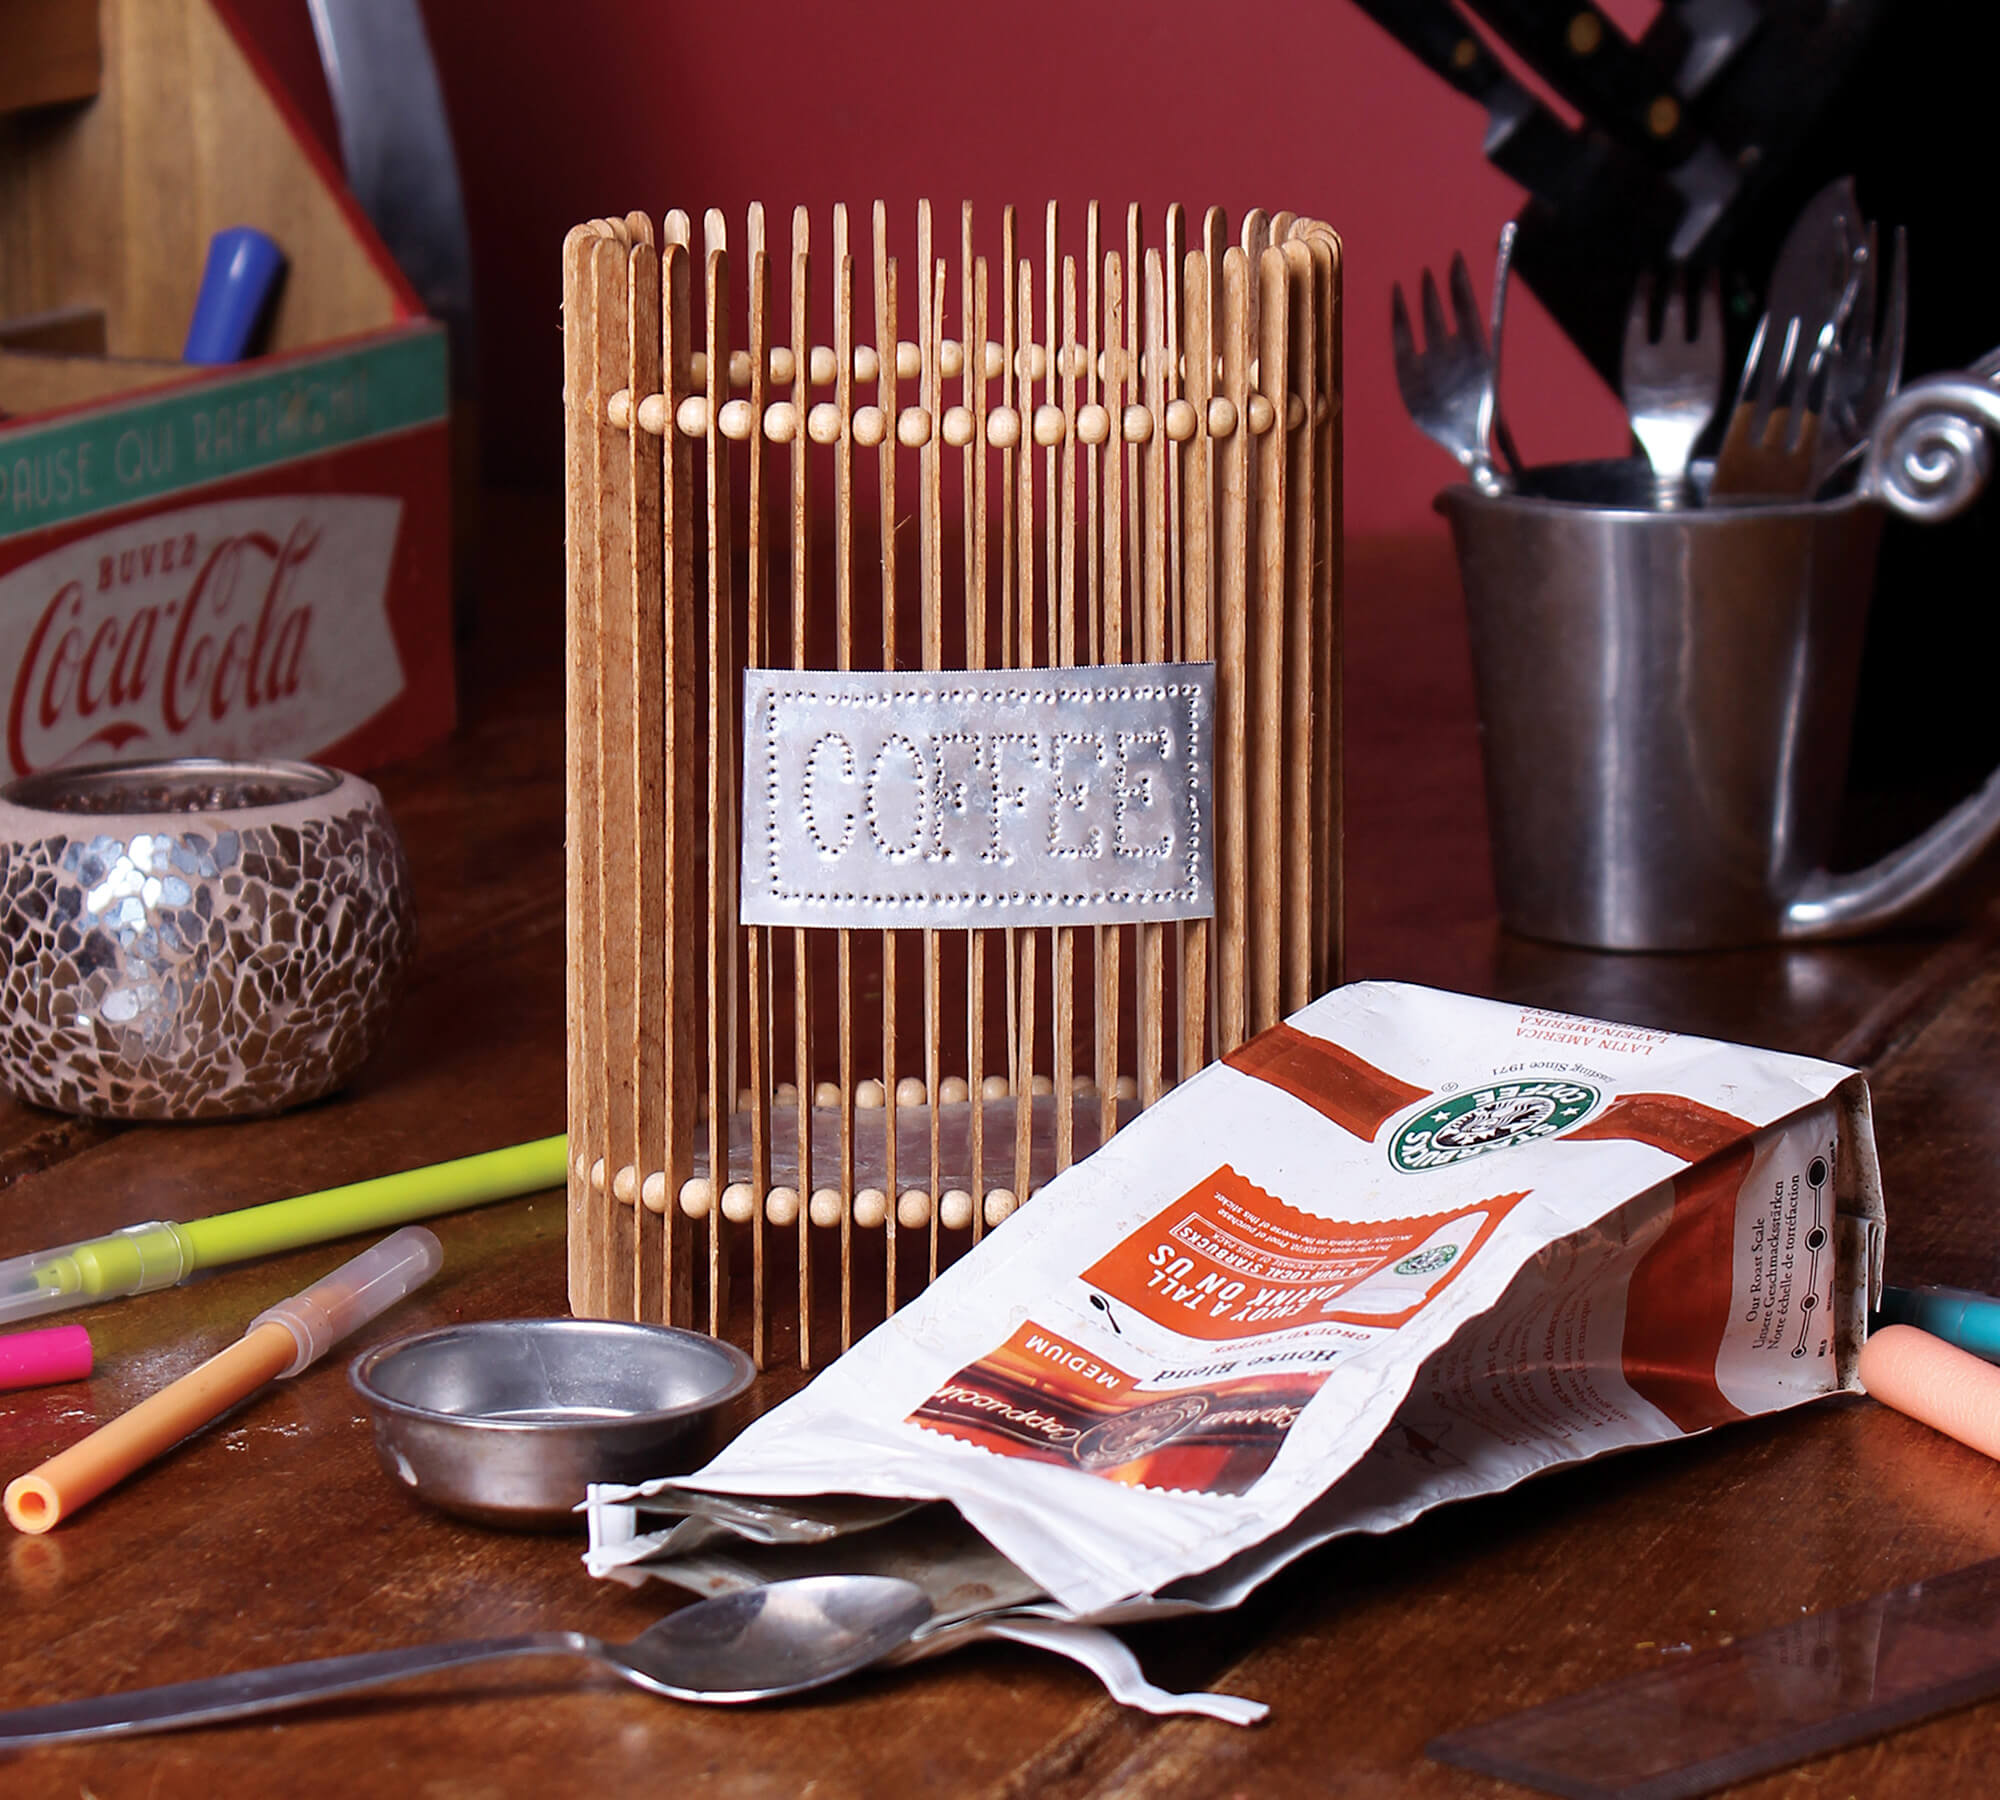 Dollar Store Crafts » Blog Archive » Make a Coffee Stir Stick Container